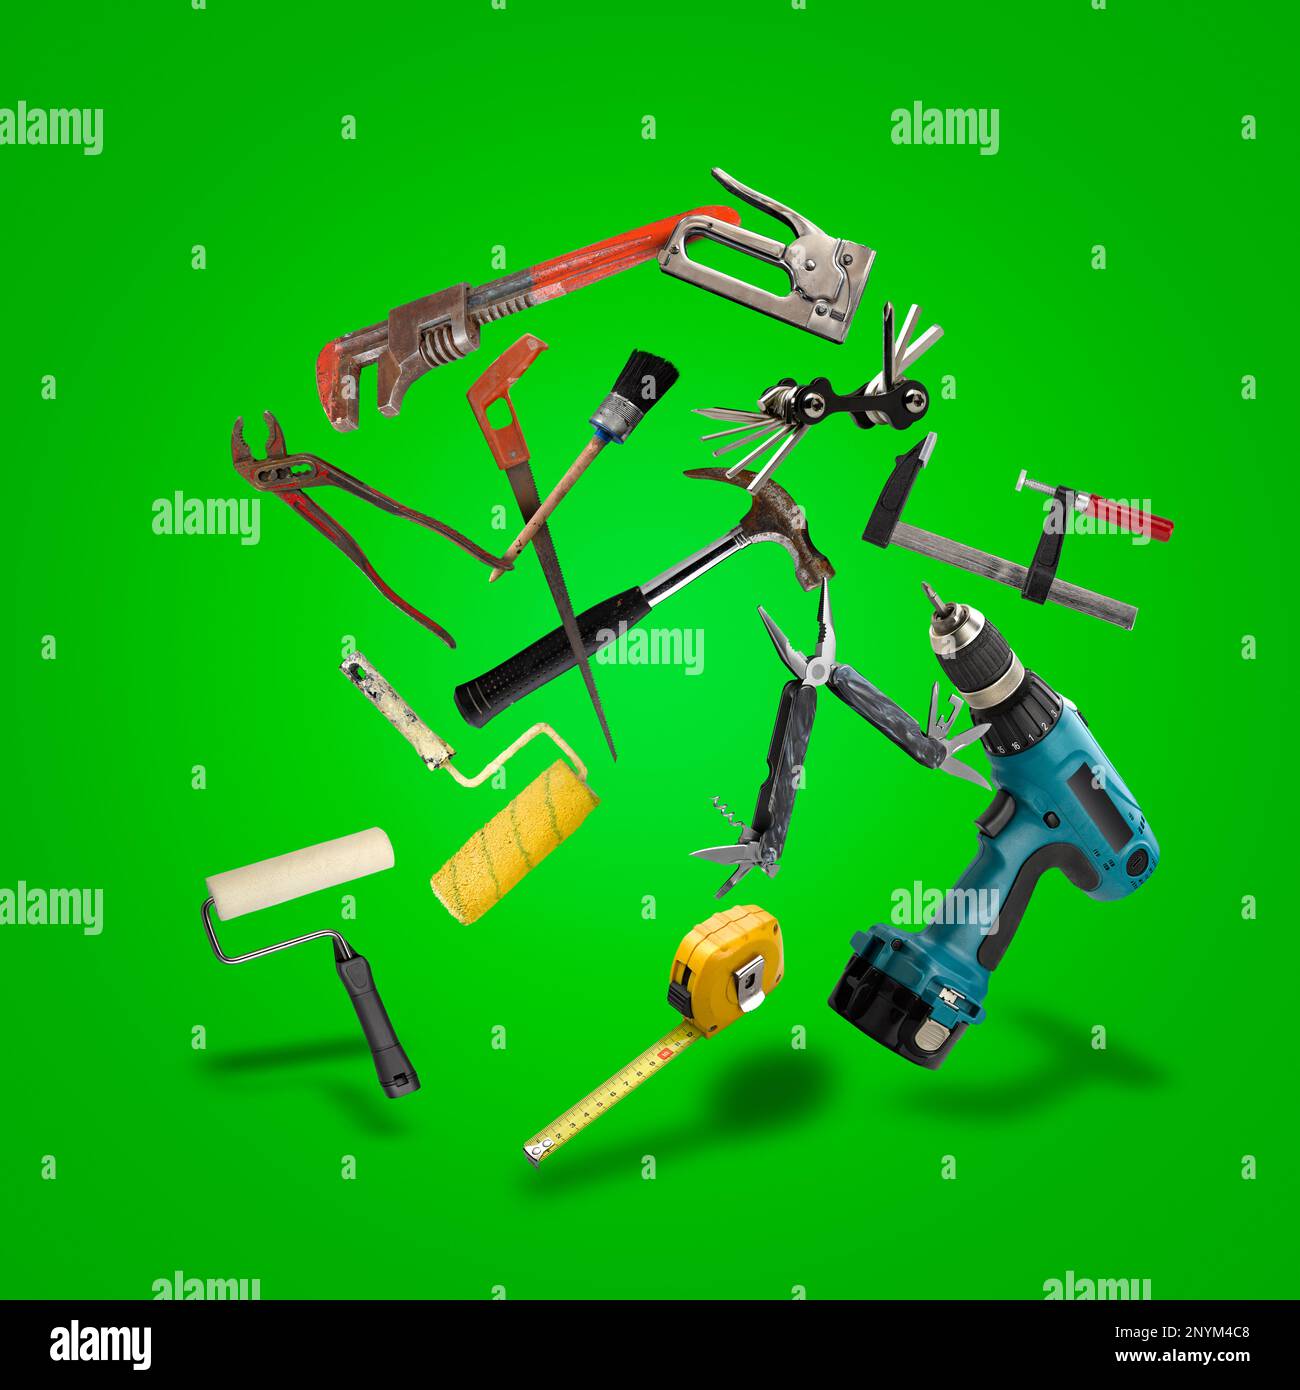 Floating Set of work tools on green gradient Stock Photo